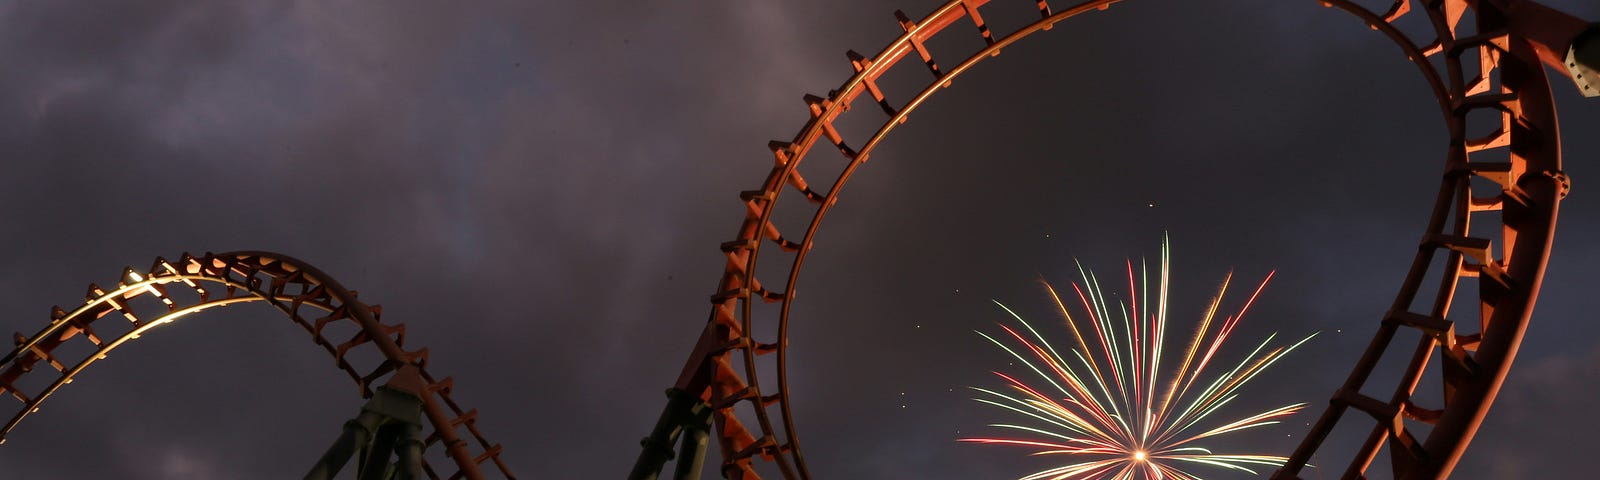 Photo of a Scary Roller Coaster by David Traña on Unsplash